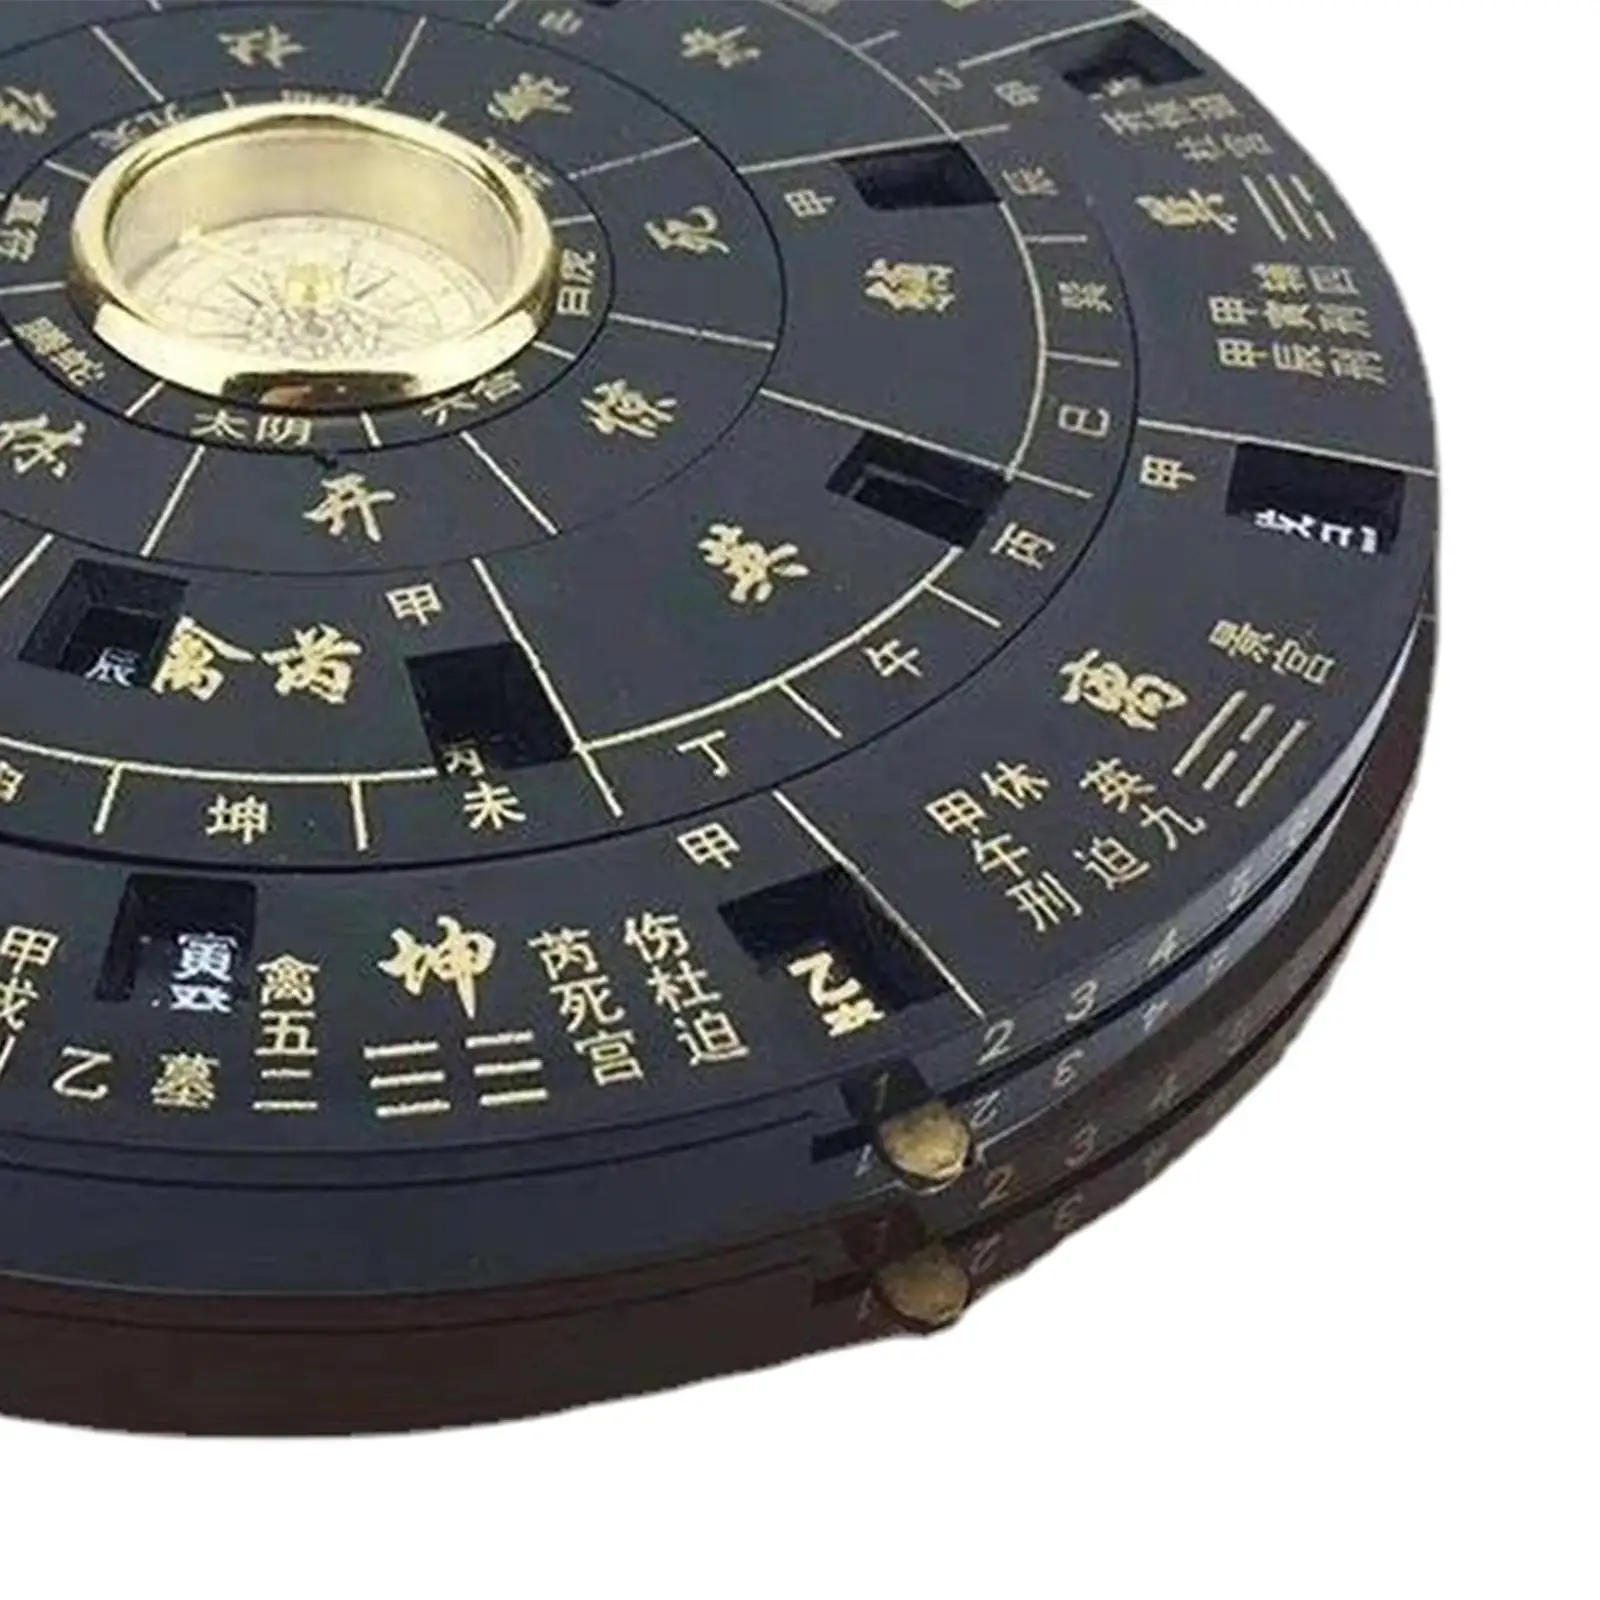 Feng Shui Compass Luo Pan Simple to Use Exquisite Chinese Compass Gadget